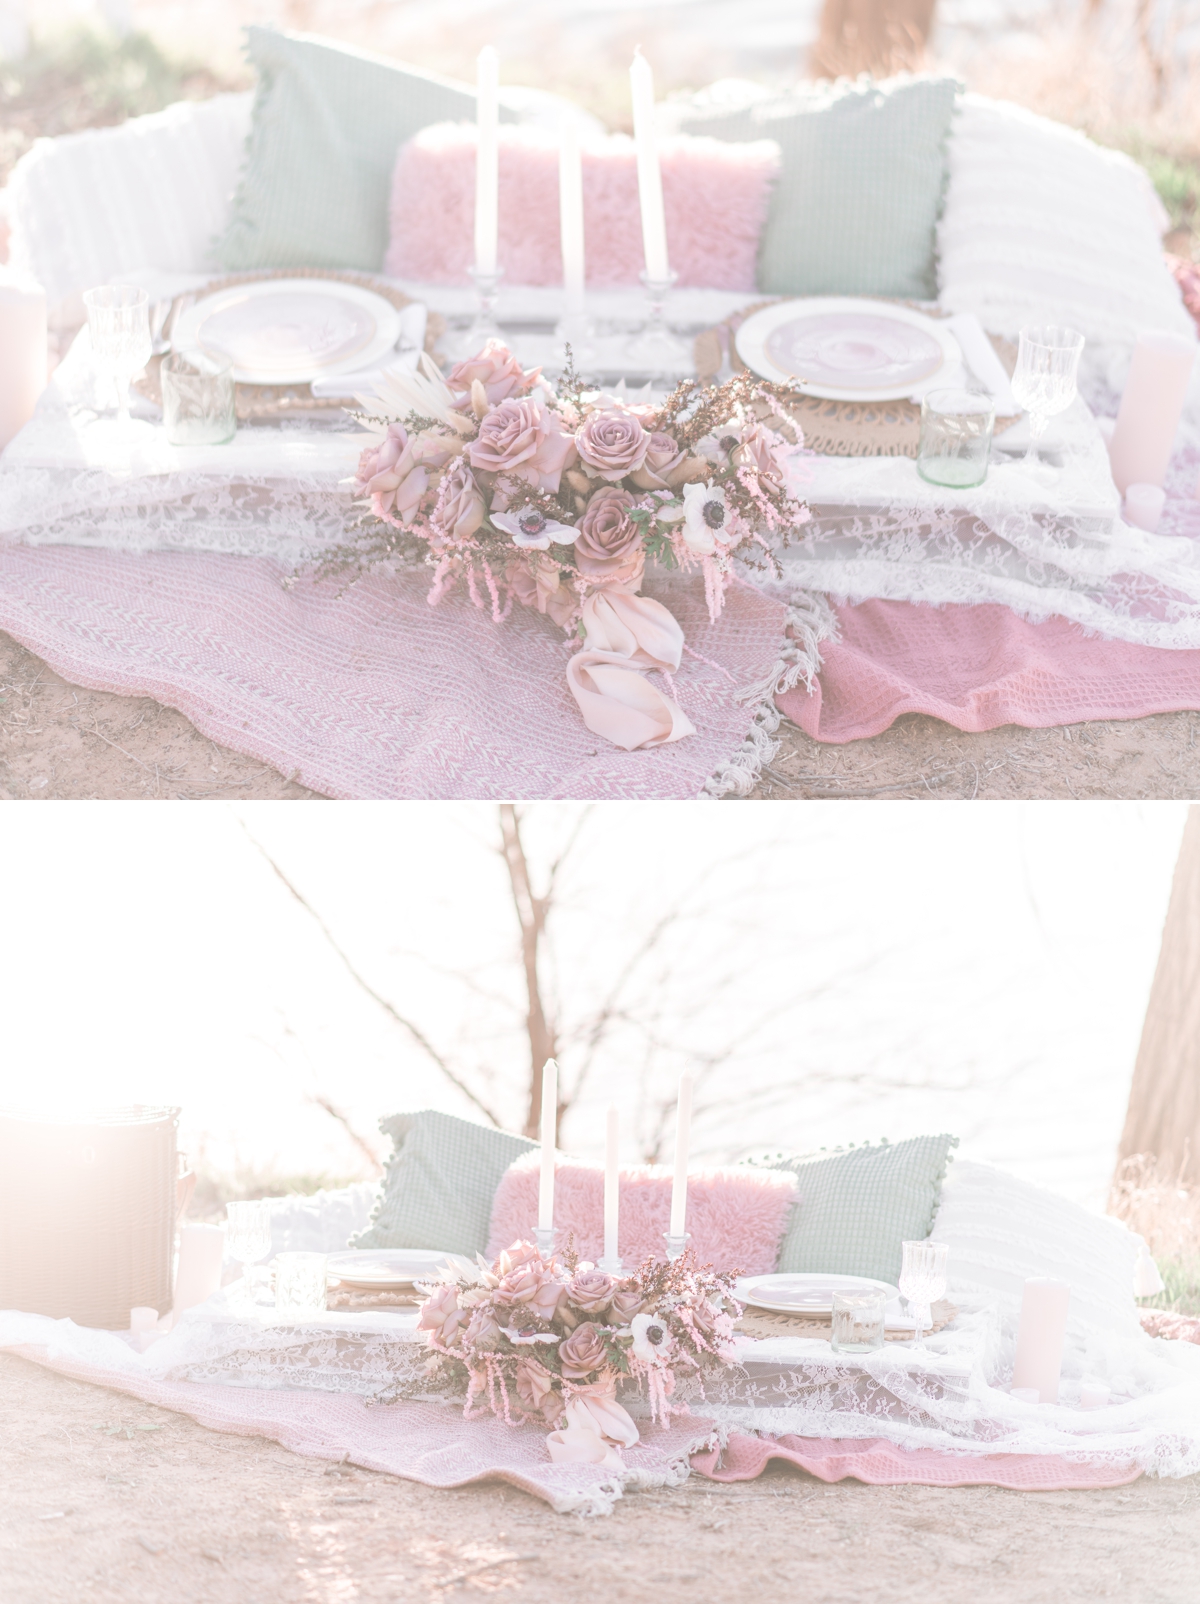 adorable picnic for bride and groom after they elope